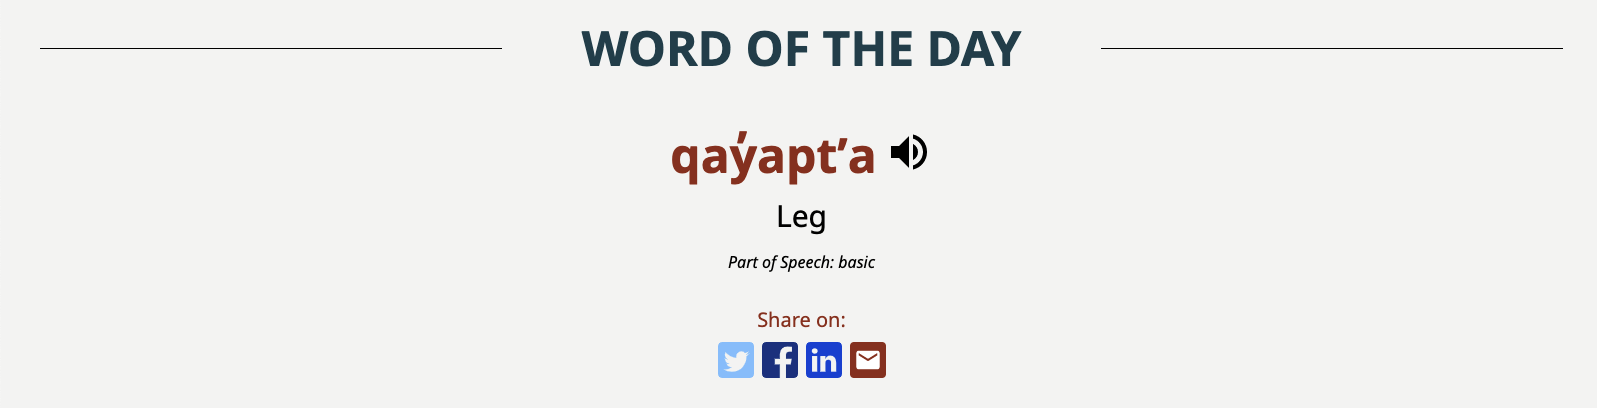 Sample word of the day widget